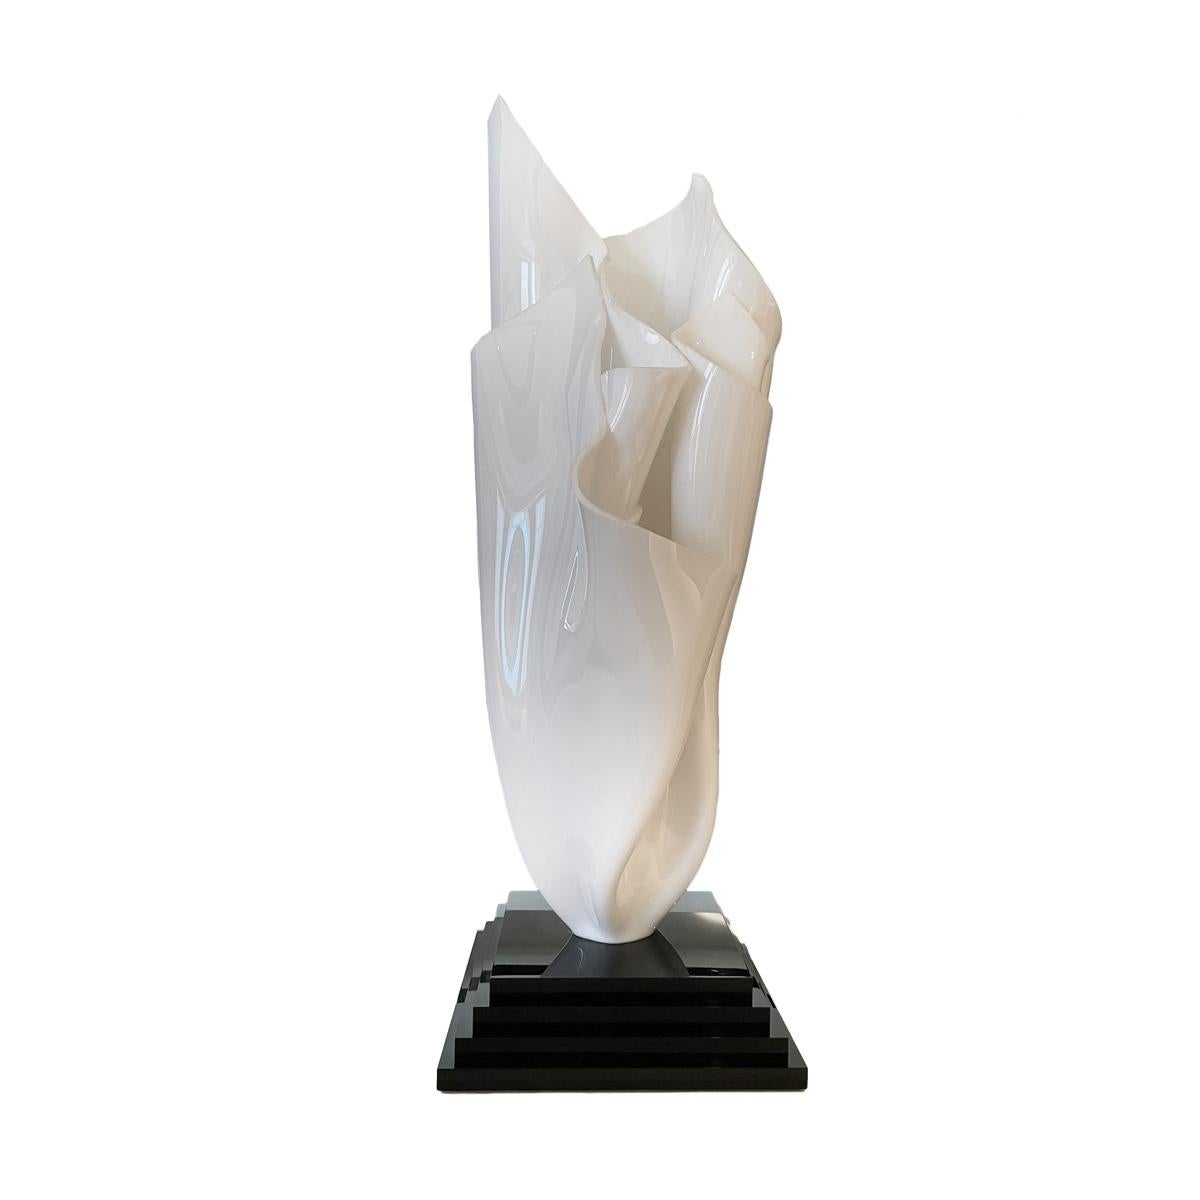 Get drawn into the incredible shape of this Abstract Sculpture that will bring a mid-century vibe to your favorite room! Base is in pure black Polypropylene 